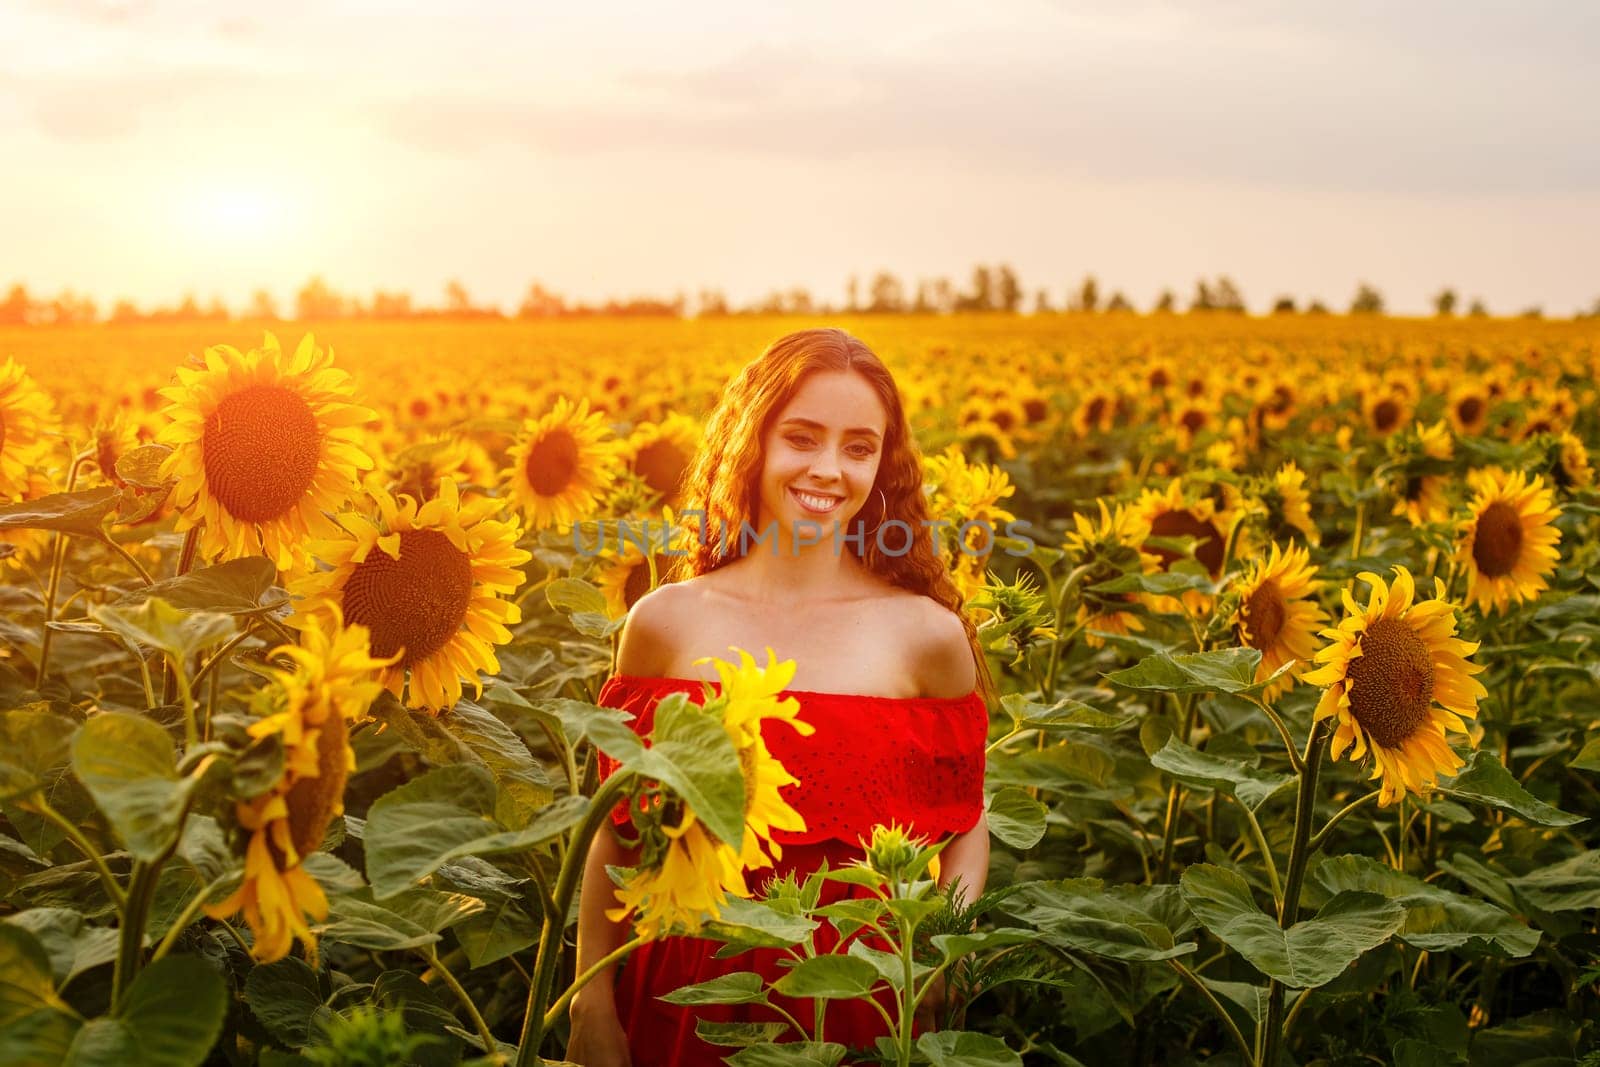 Young woman smiling at sunset in a field of sunflowers. by EkaterinaPereslavtseva